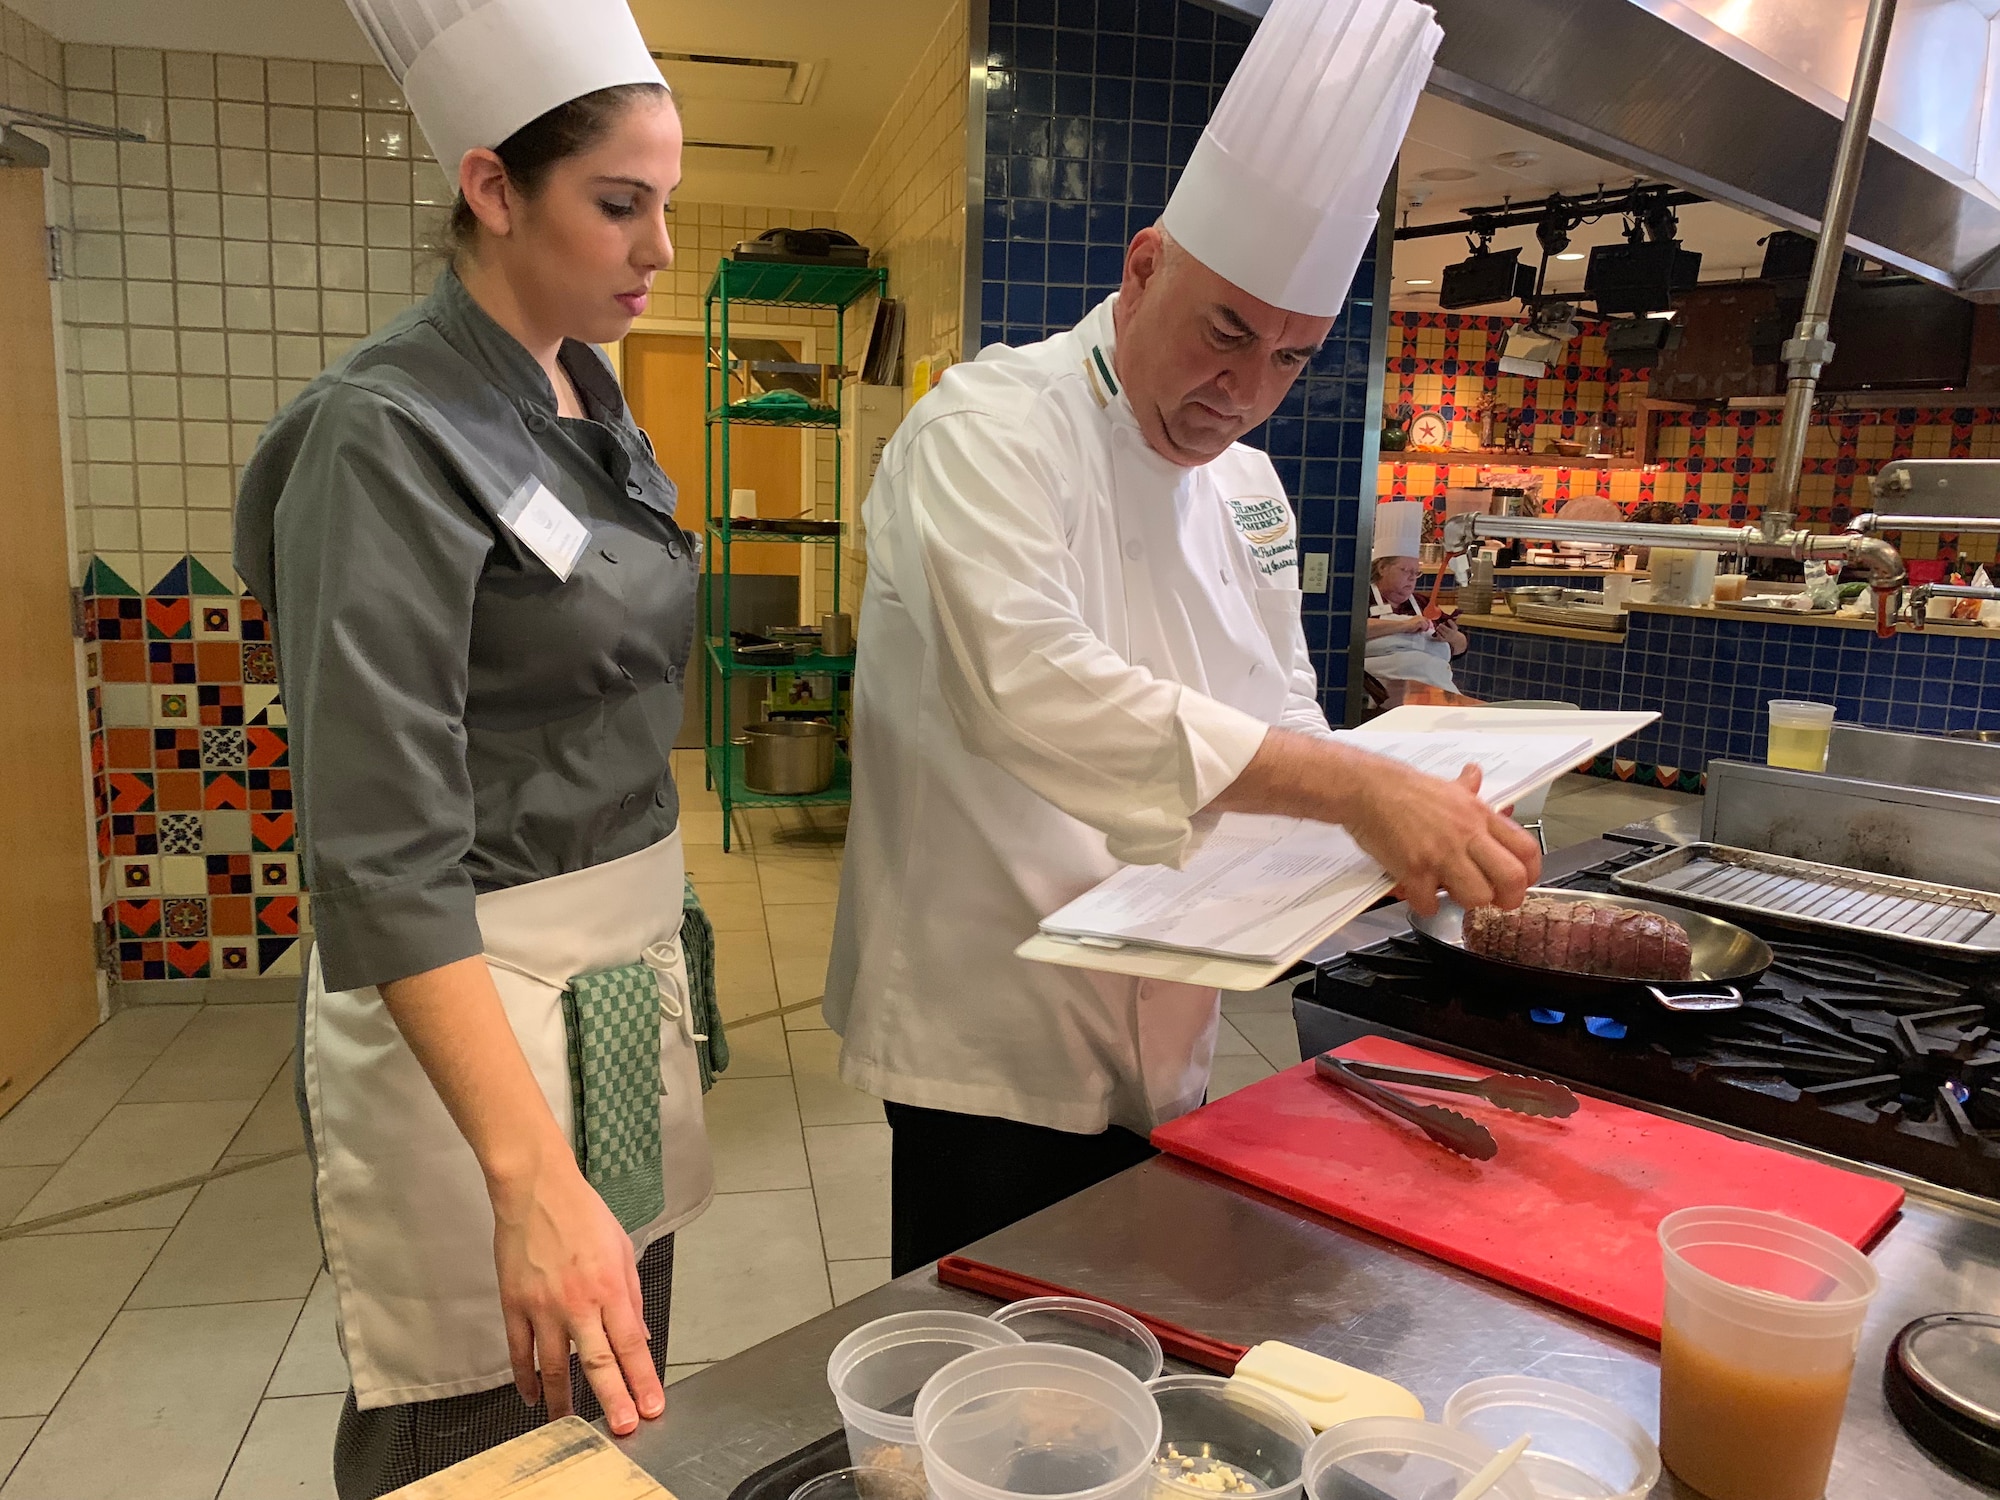 Culinary Institute of America San Antonio Chef Will Packwood and Gabriela Irwin, a chef at Spangdahlem Air Base, Germany, look over a pork loin recipe during the practical portion of the first Air Force Techniques of Healthy Cooking Course June 5, 2019, in San Antonio. Sixteen nonappropriated fund food and beverage chefs and cooks from across the Air Force attended the course established by the Air Force Services Center, in partnership with the CIA San Antonio. The five-day course is designed to teach and demonstrate healthier ingredients, flavorful spicing and better cooking methods to deliver healthier menu choices at food service operations across installations, not just at dining facilities. (U.S. Air Force photo by Debbie Aragon)